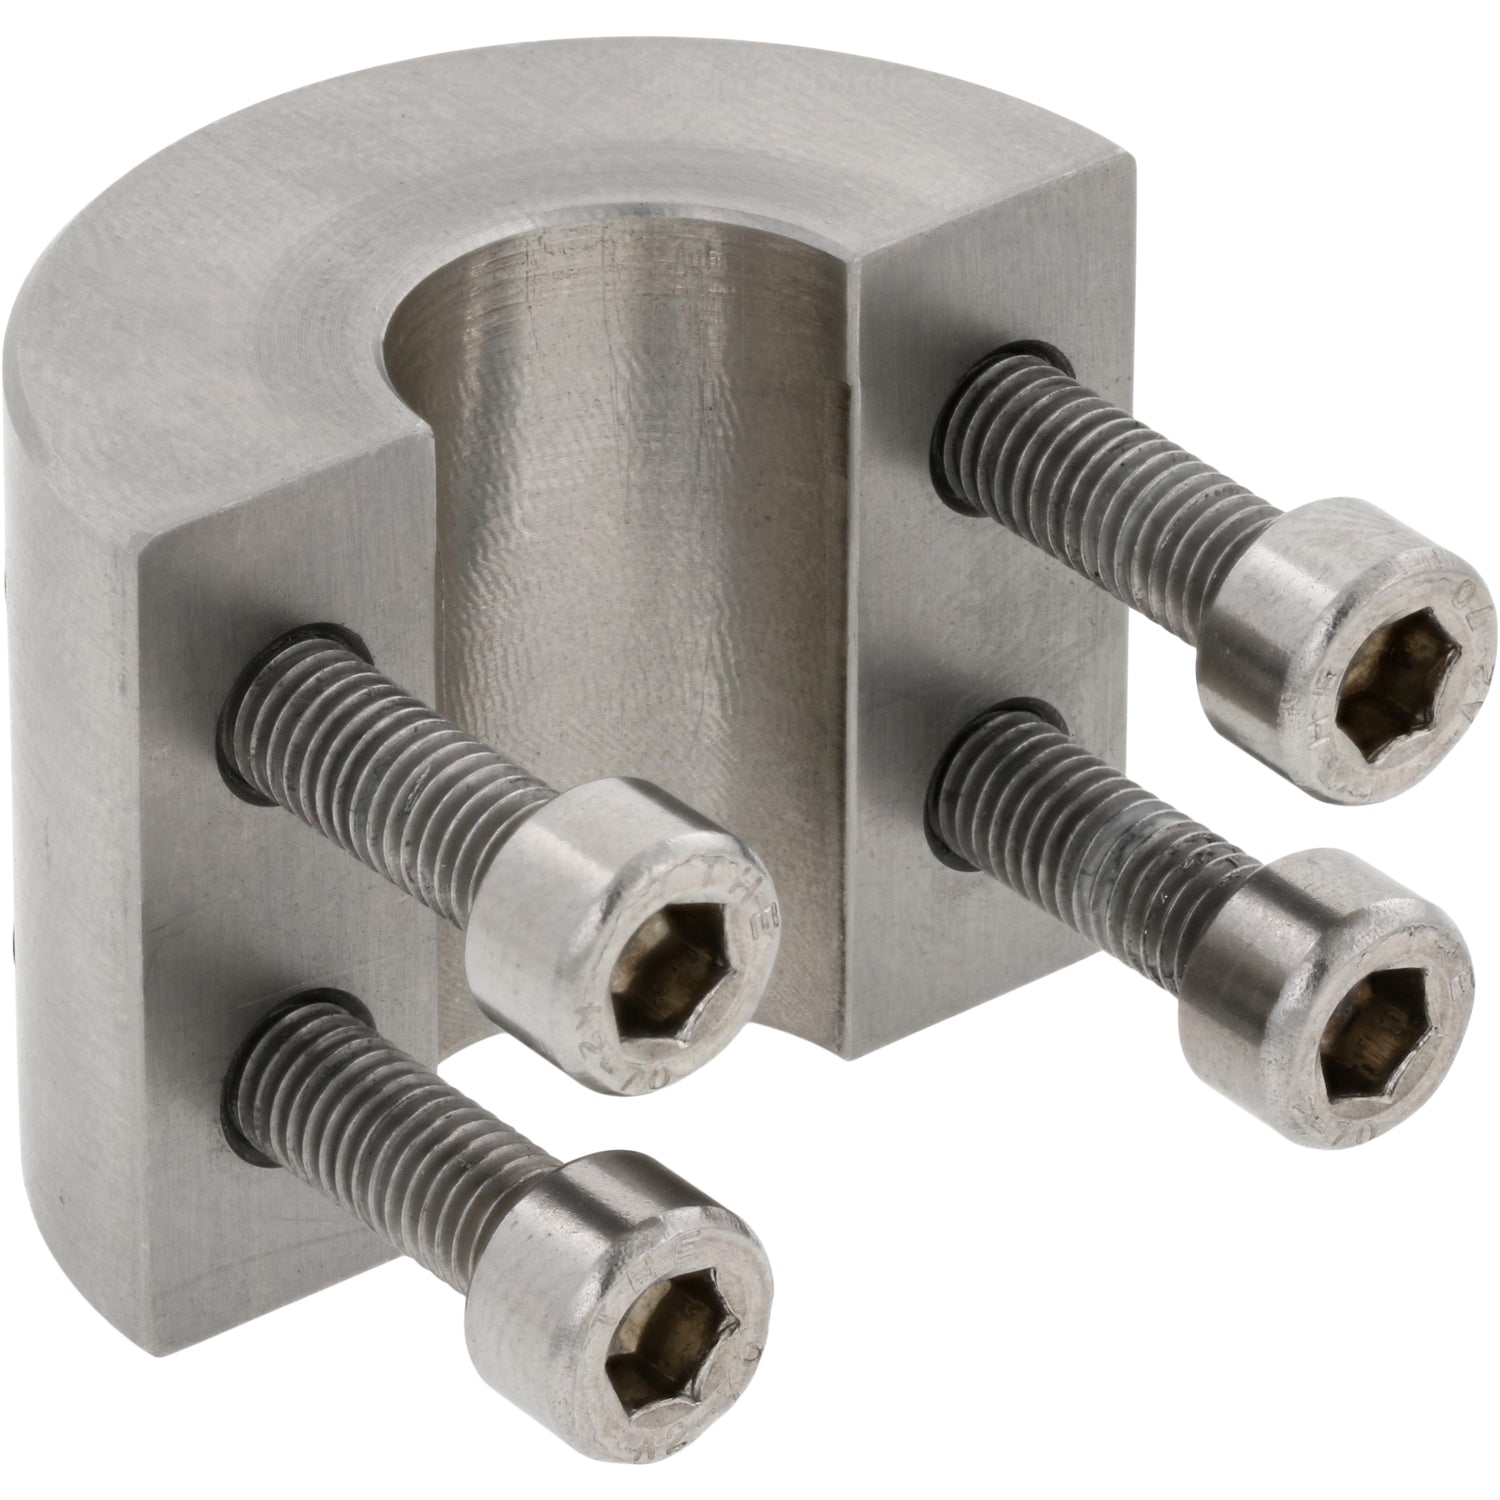 Stainless steel half cylindrical part with four socket head screws threaded into part. Part shown on white background. 